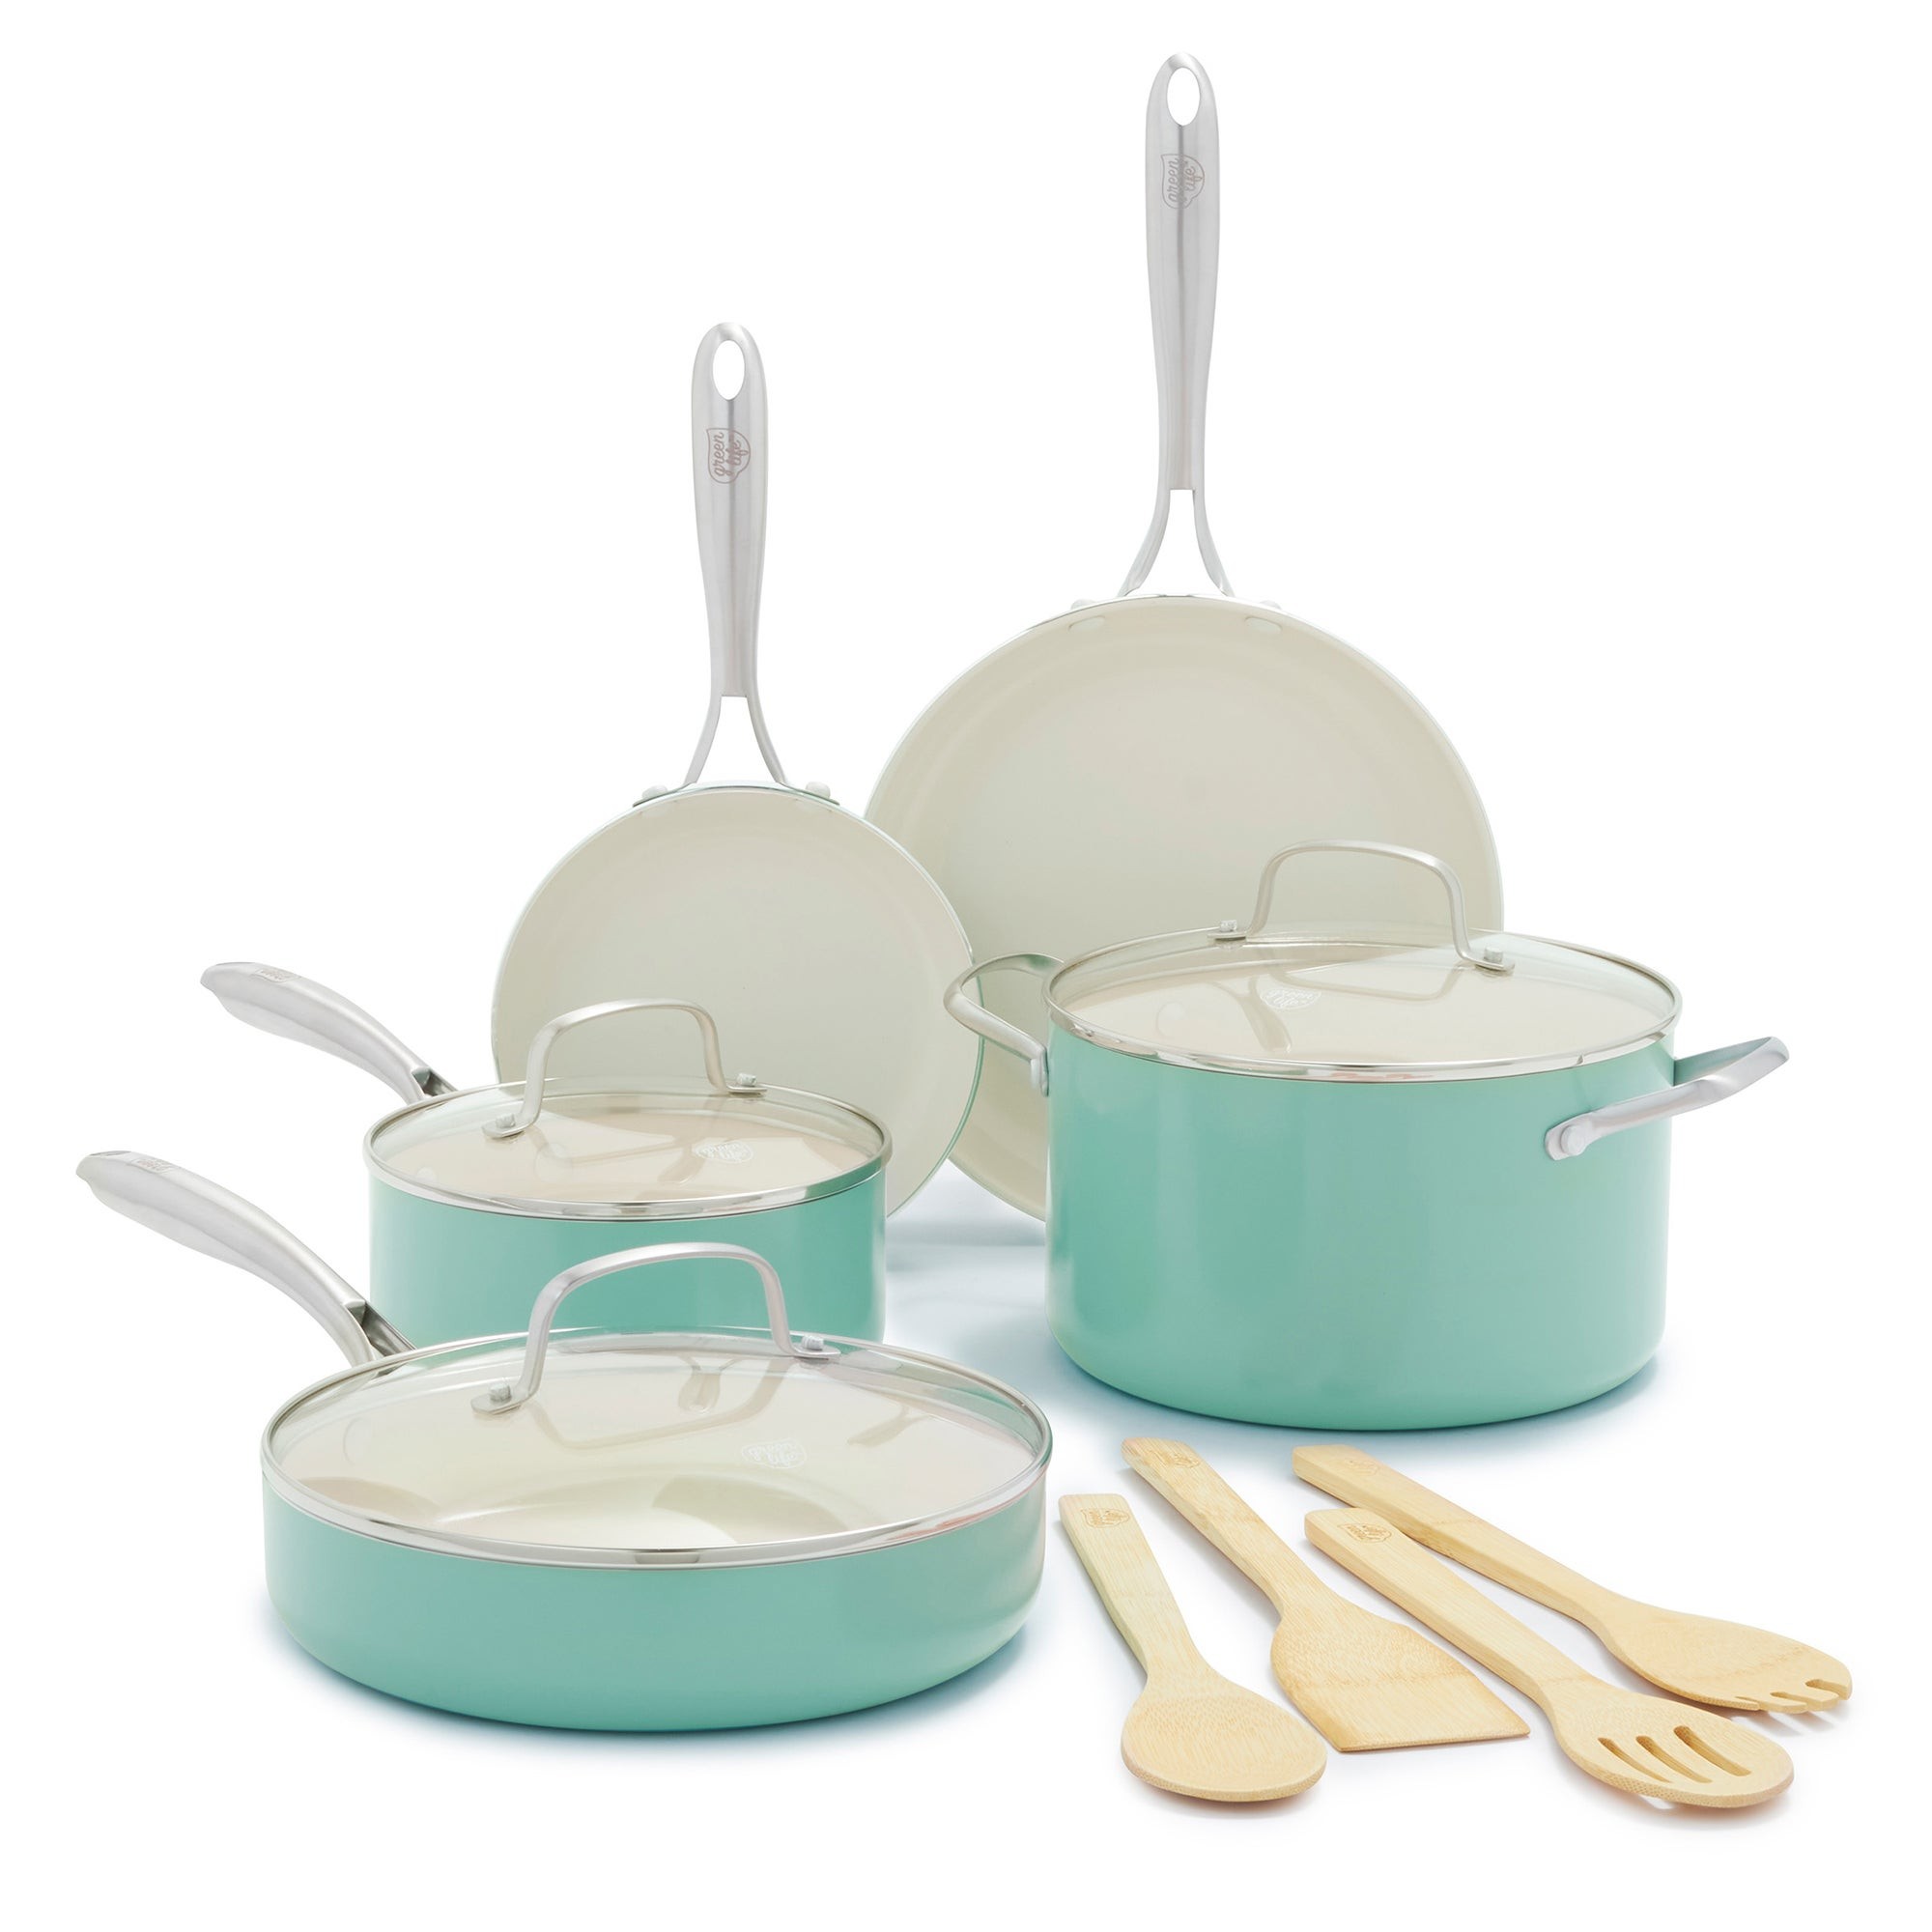 Artisan Healthy Ceramic Nonstick 12pc Cookware Set Turquoise